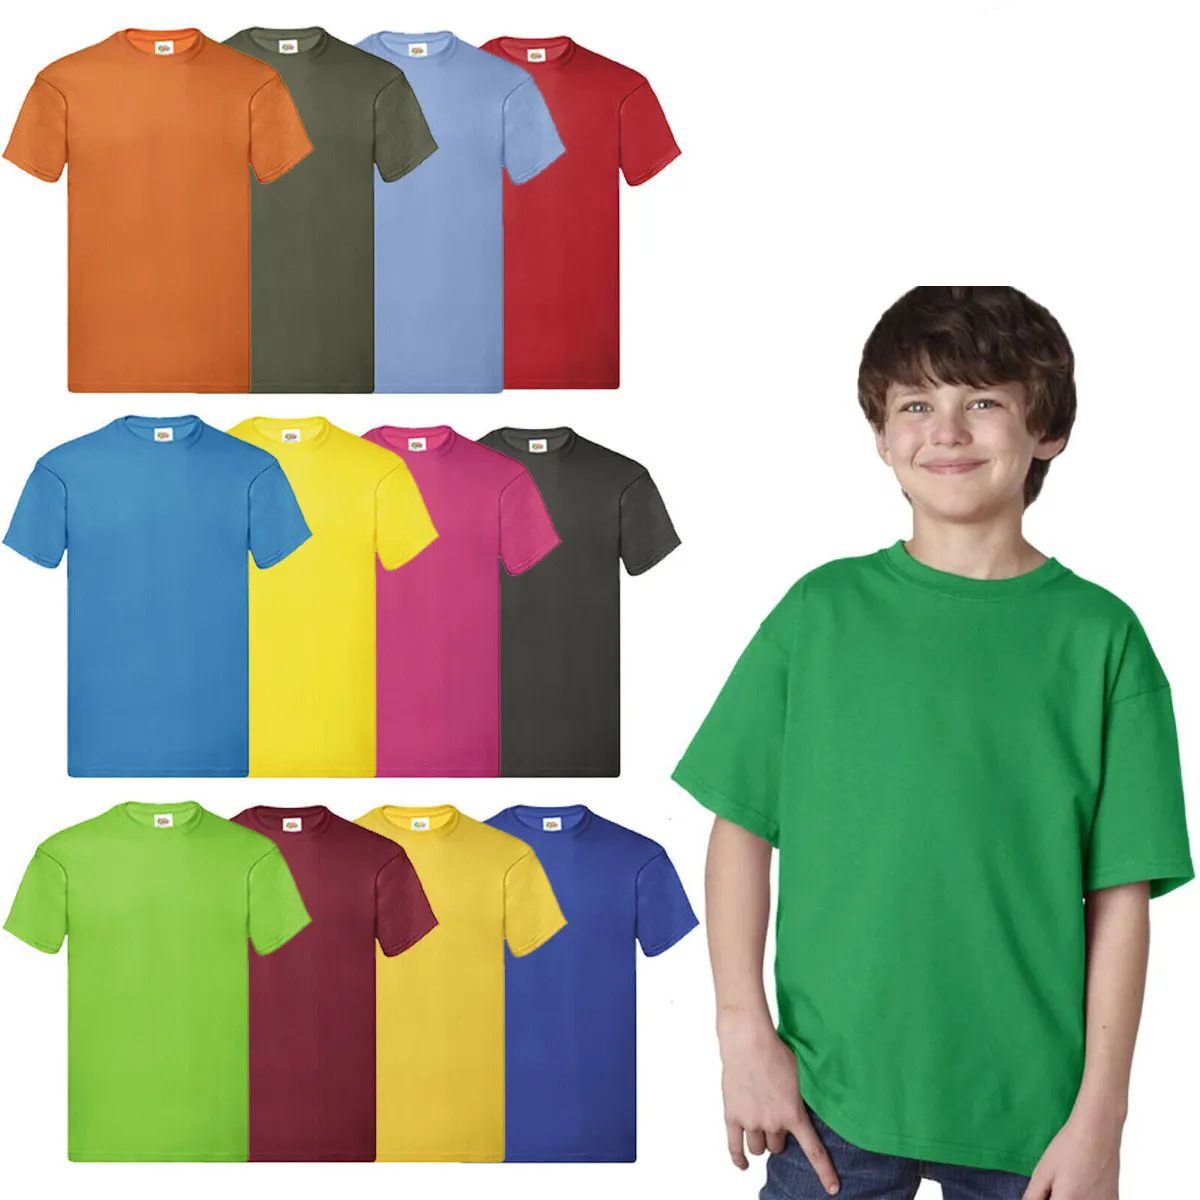 288 Pieces of Billion Hats Kids Youth Cotton Assorted Colors T Shirts Size XL